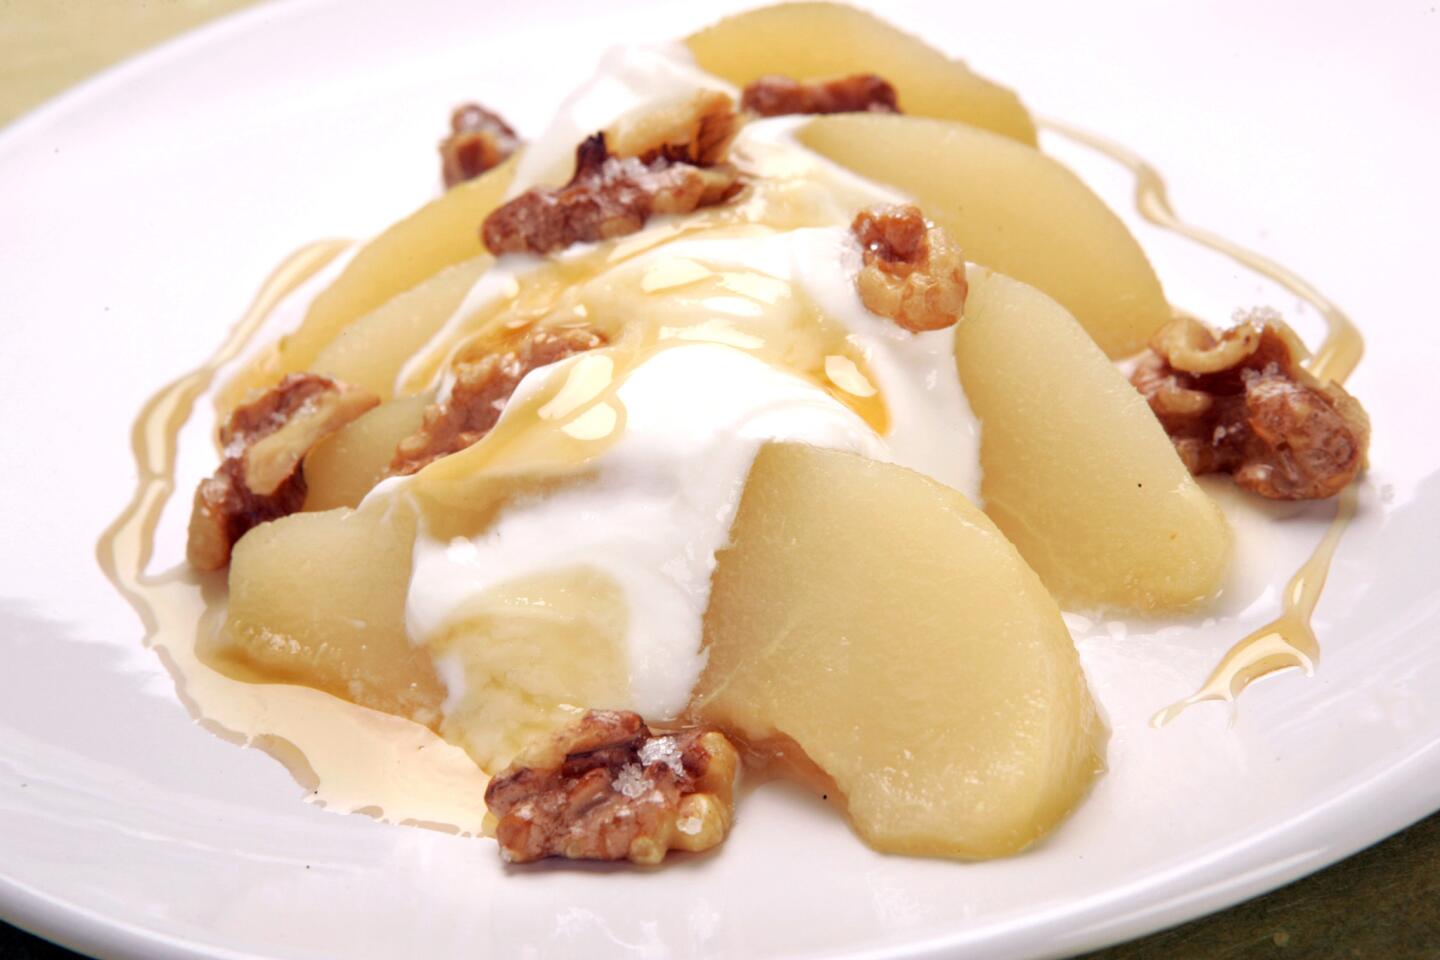 Honey-poached pear with Greek yogurt and toasted walnuts